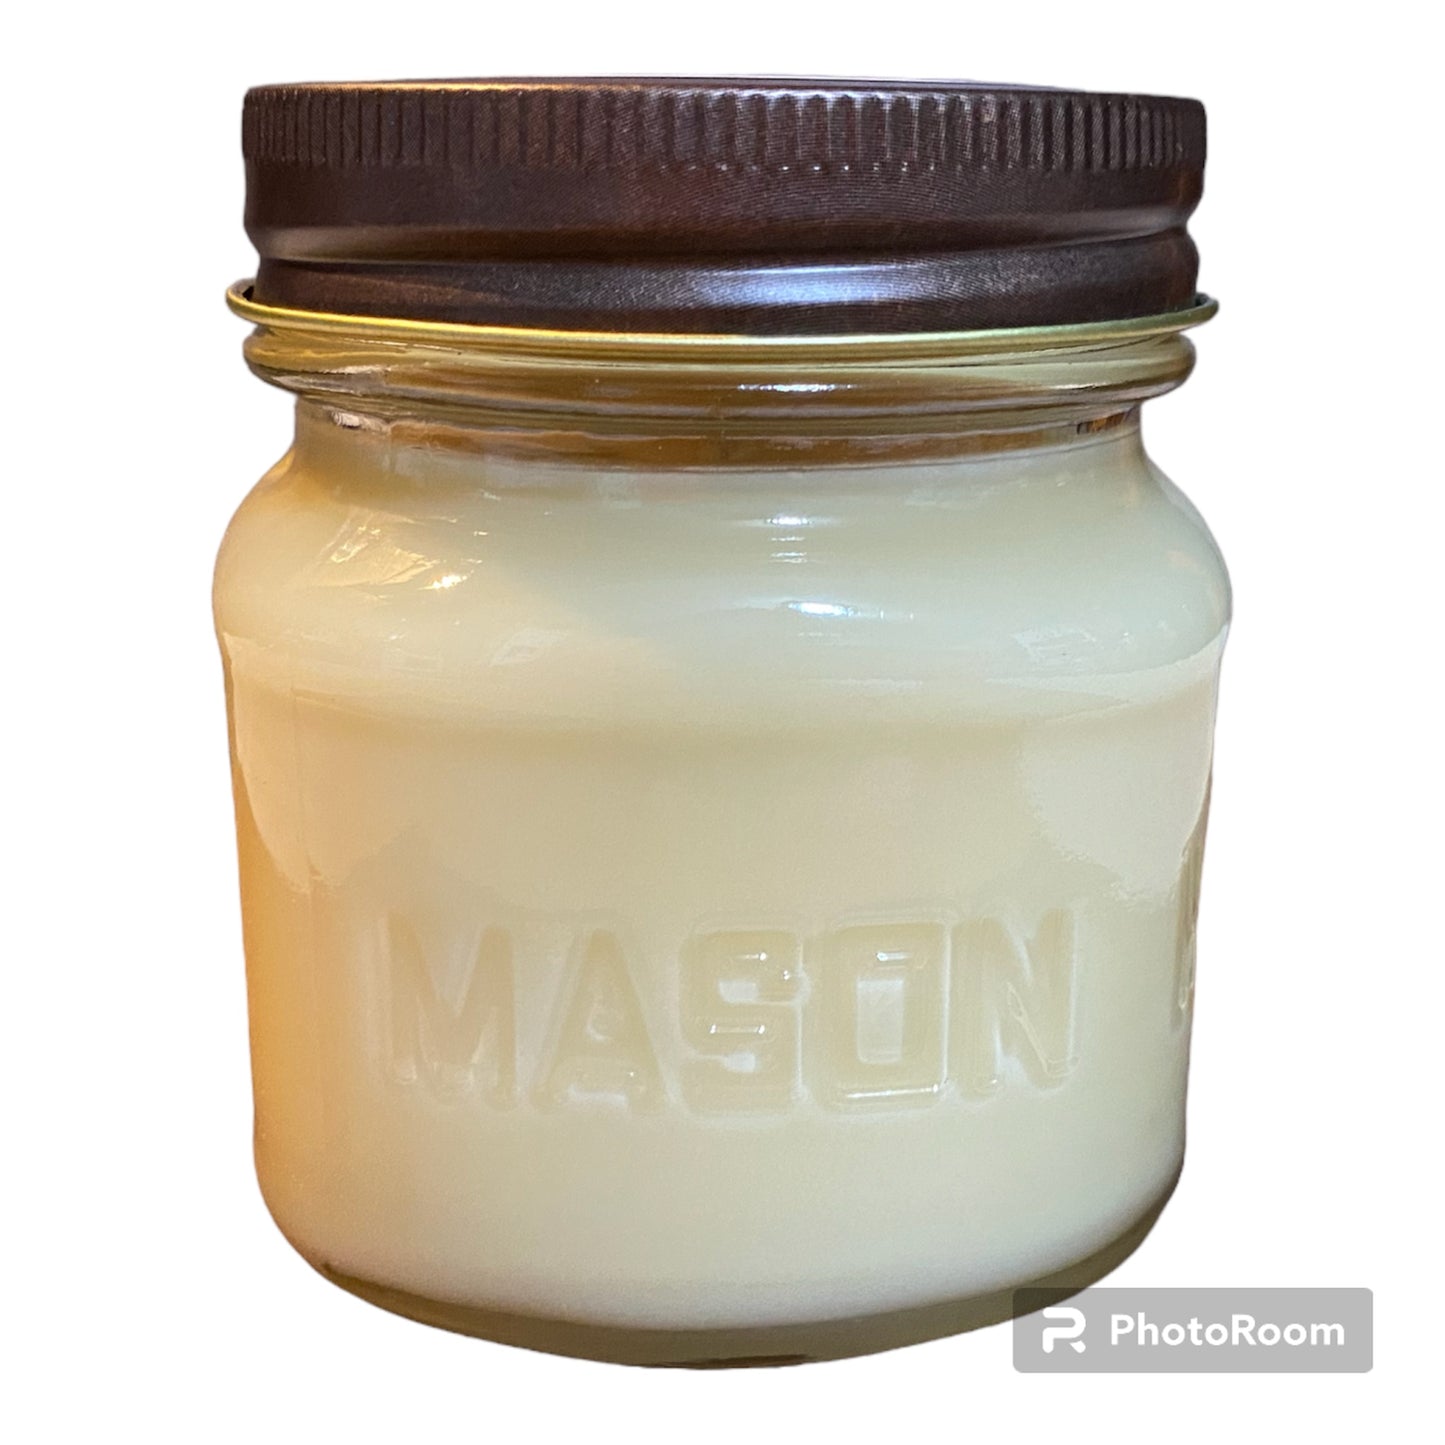 Candles, Handmade, Mason Jar, Food Scented Coconut Soy Wax Candles, Assorted Scents - 8oz